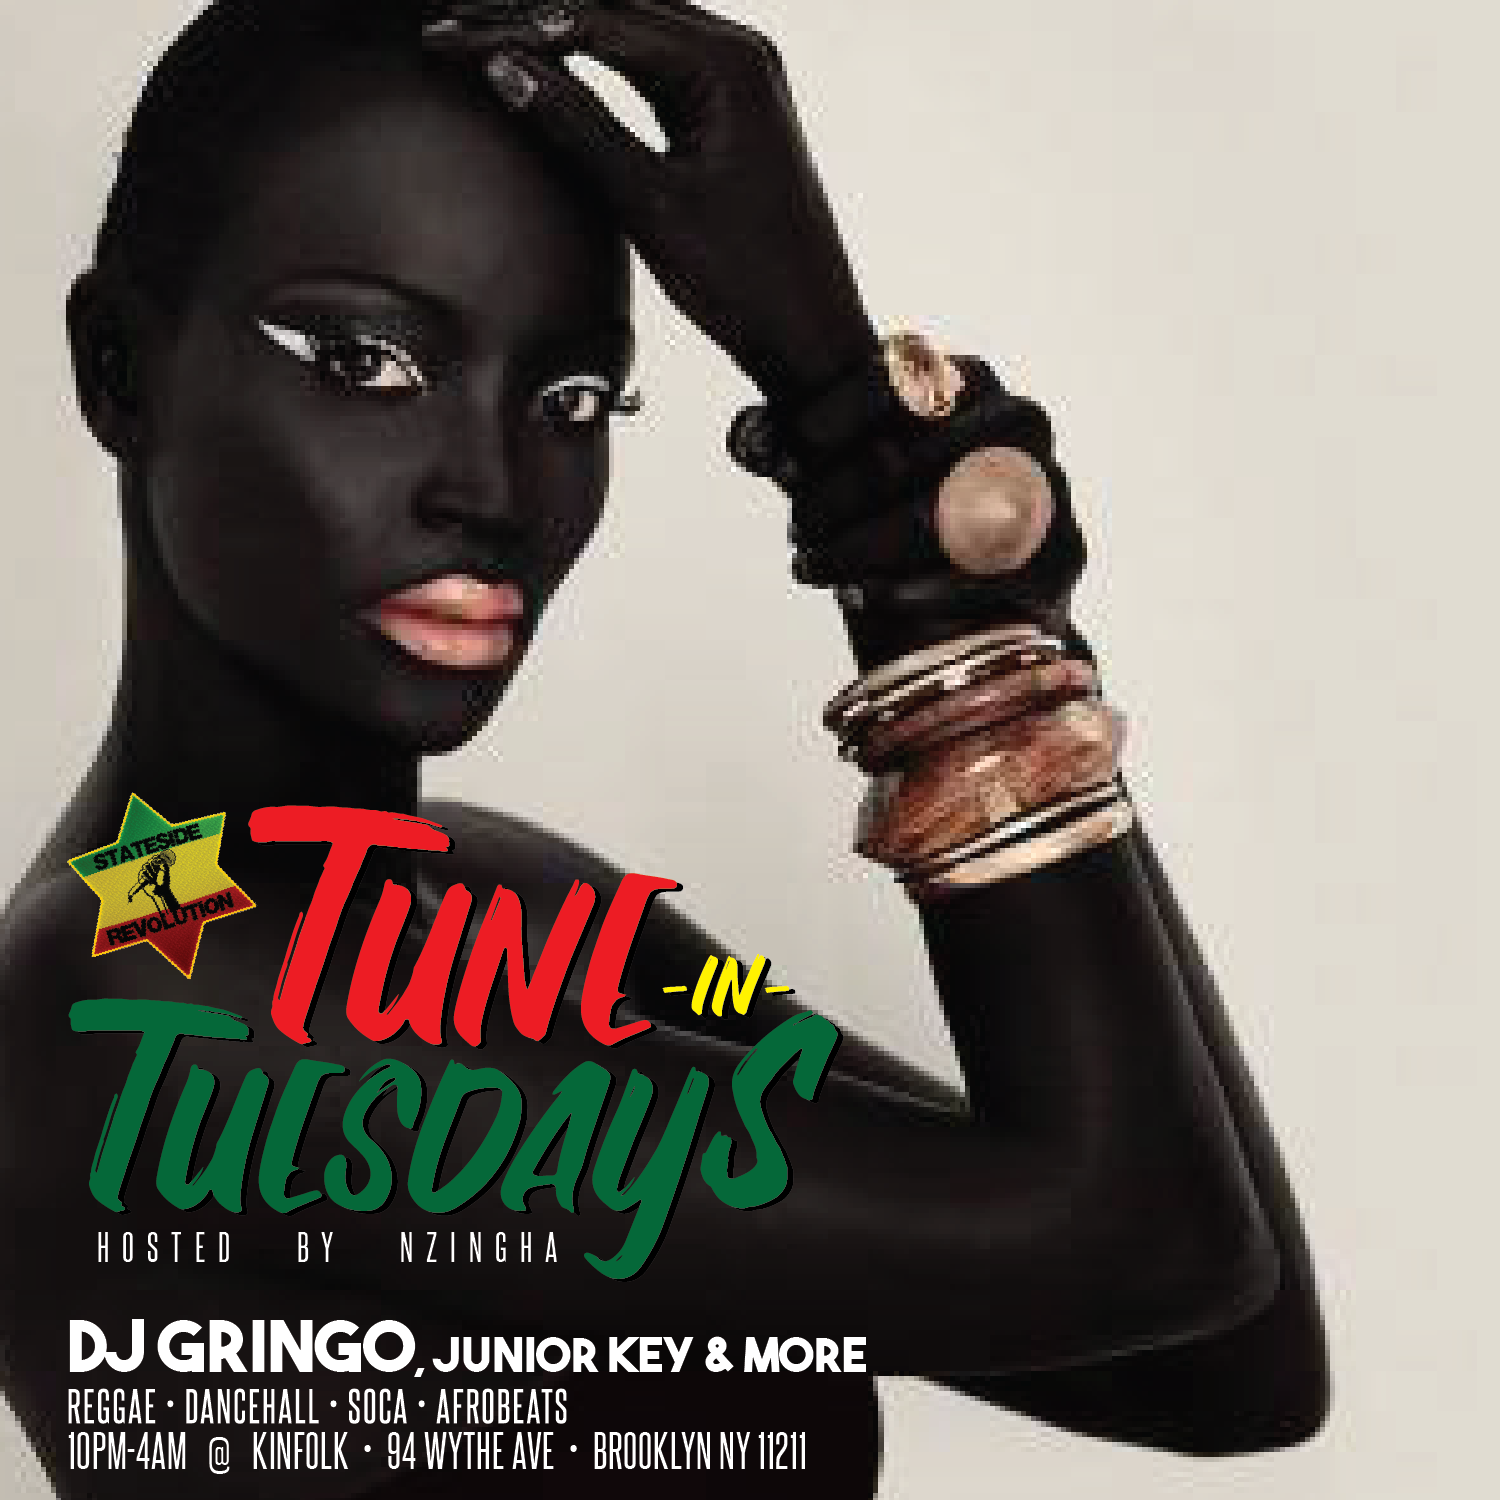  Tune In Tuesday’s At Kinfolk with the best of reggae afrobeats and soca